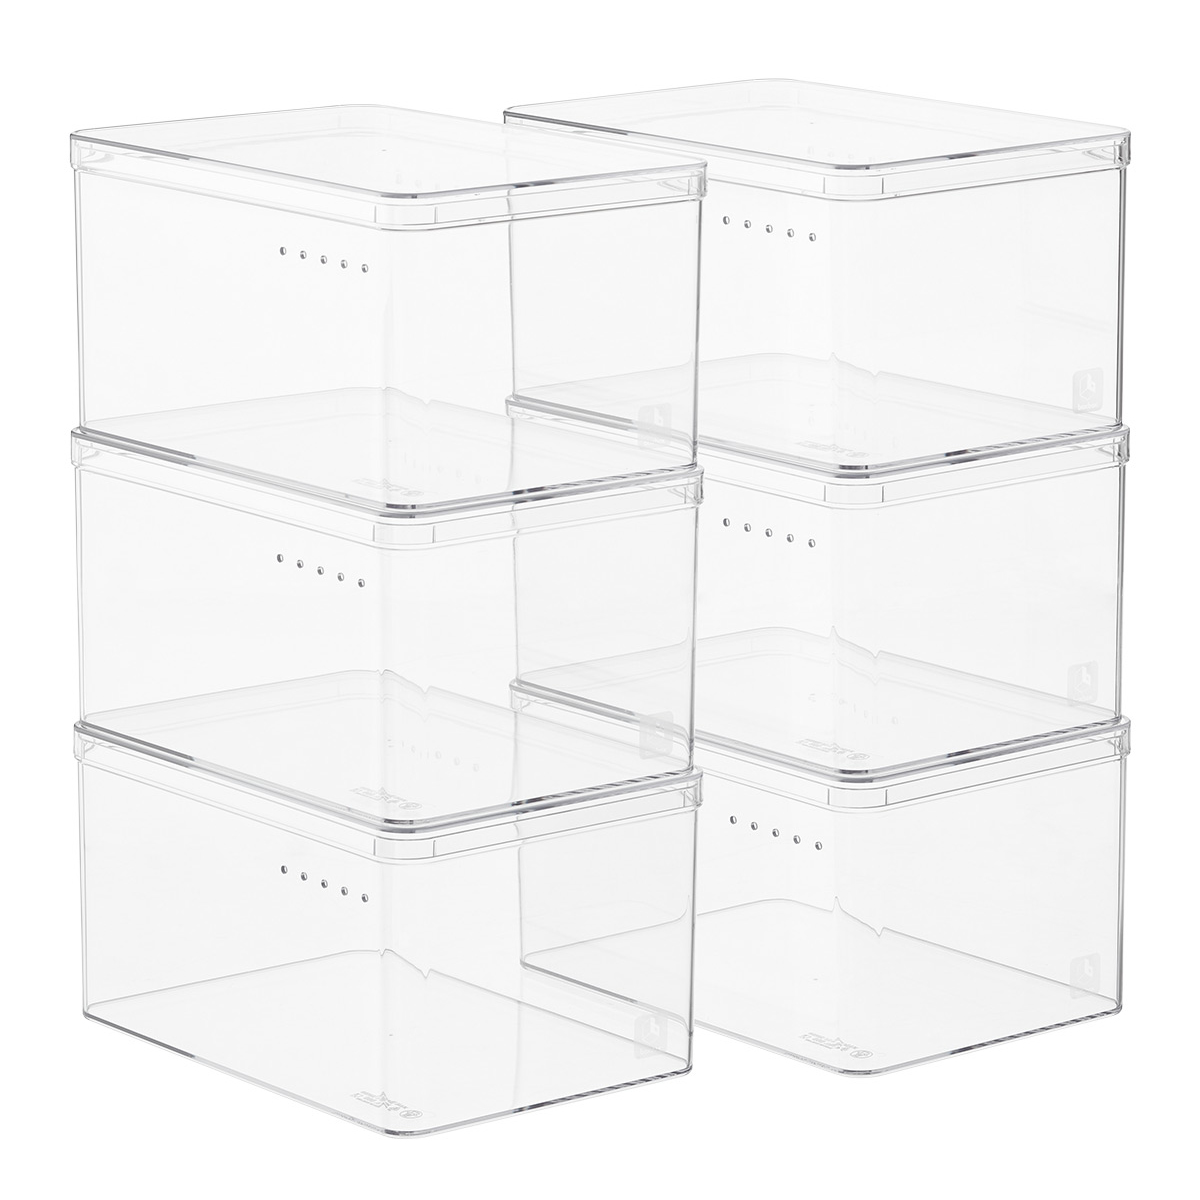 https://www.containerstore.com/catalogimages/478696/10092634-the-container-store-6-case-.jpg